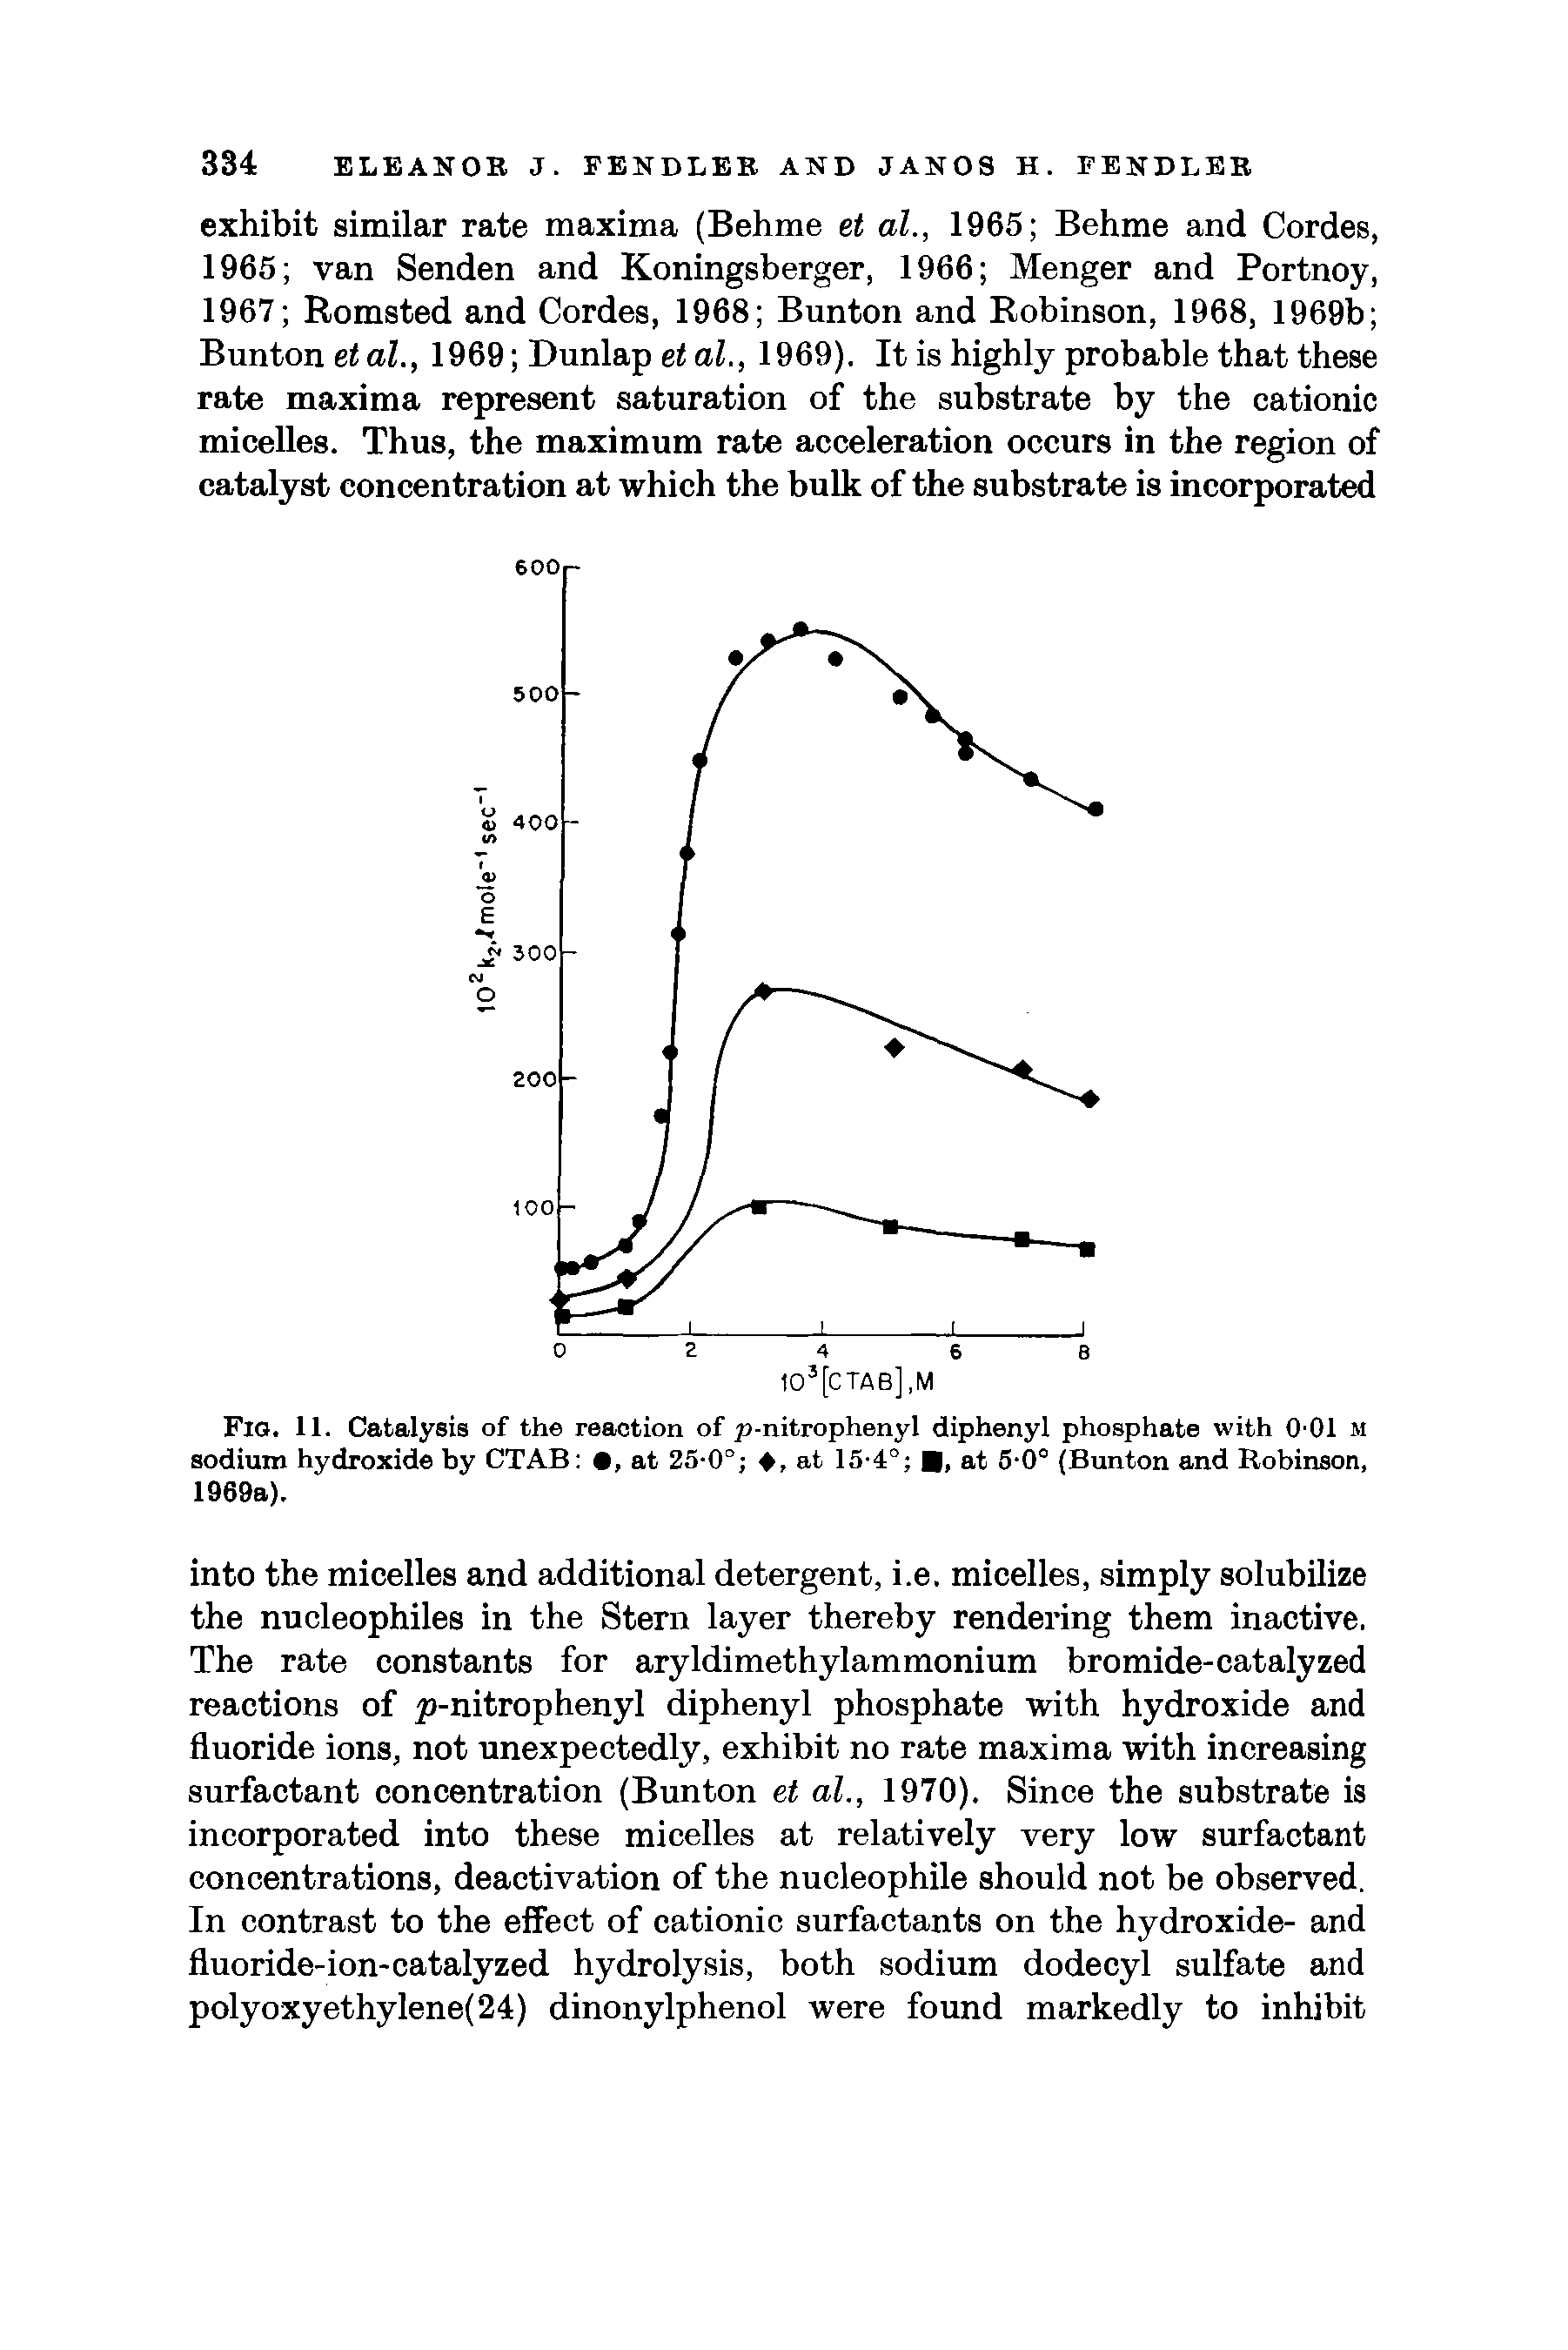 Fig. 11. Catalysis of the reaction of p-nitrophenyl diphenyl phosphate with 0 01 m sodium hydroxide by CTAB , at 25-0 , at 15-4 , at 5-0° Bunton and Robinson, 1969a).